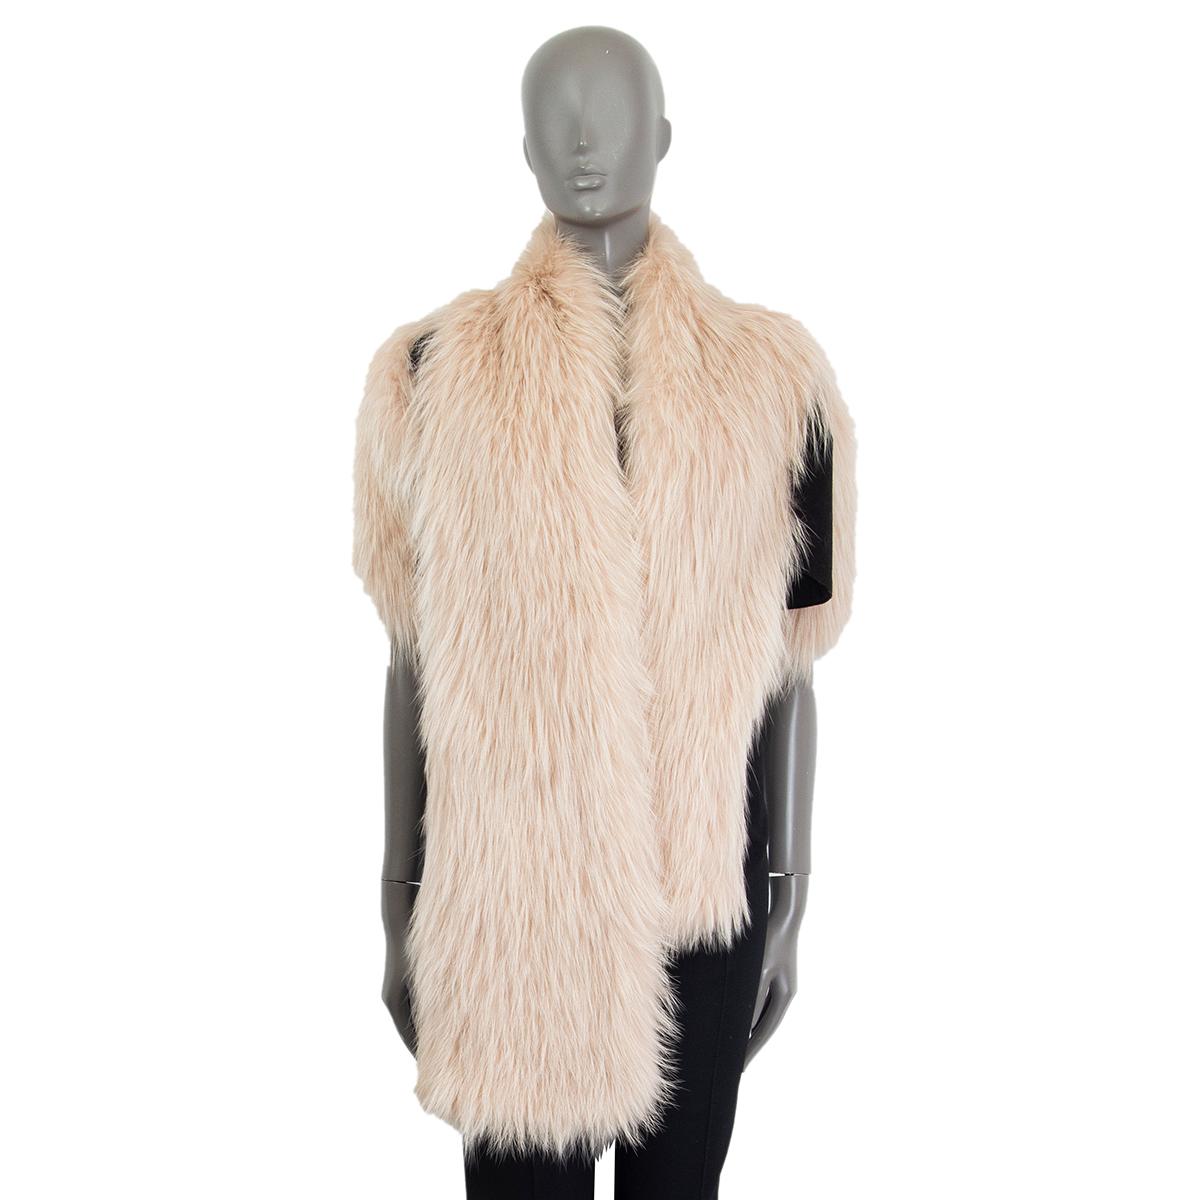 Balenciaga cropped fur bolero in fallow fox fur (60%), black virgin wool (30%) and polyamide (10%) with short sleeves. Has a long asymmetrical shawl collar. Lined in black silk (100%). Has been worn and is in excellent condition. 

Tag Size 38
Size